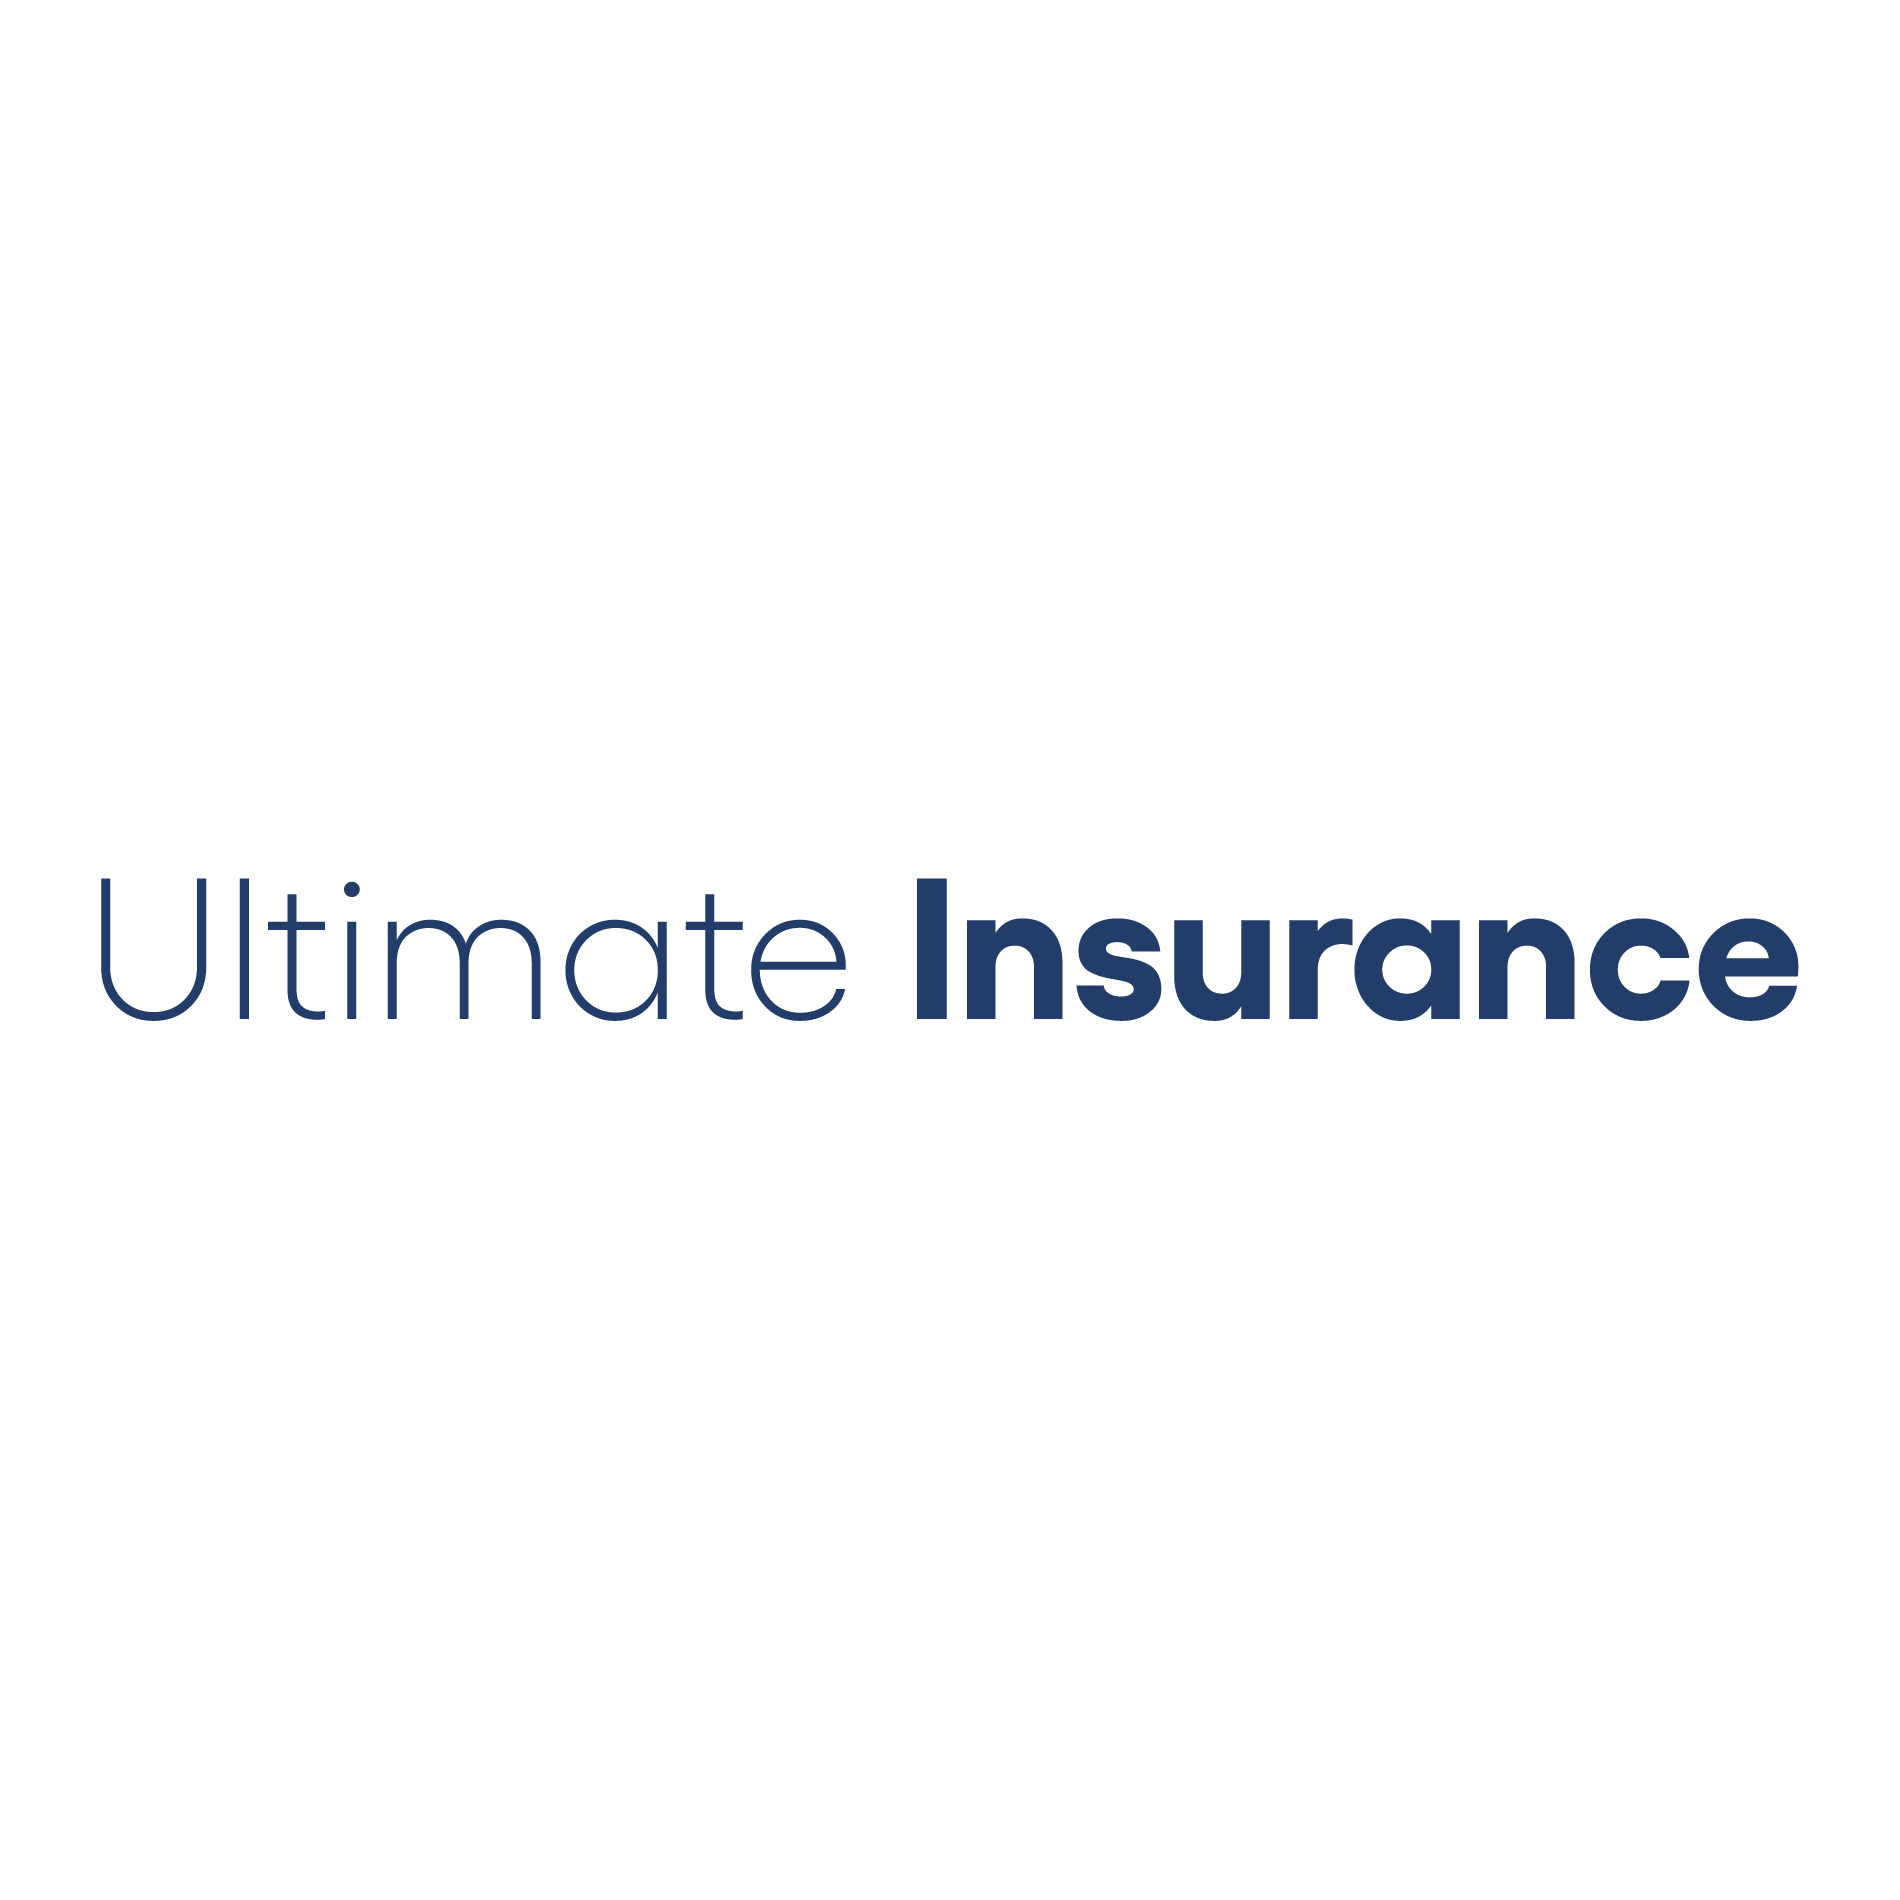 UltimateInsurance Insurance Review